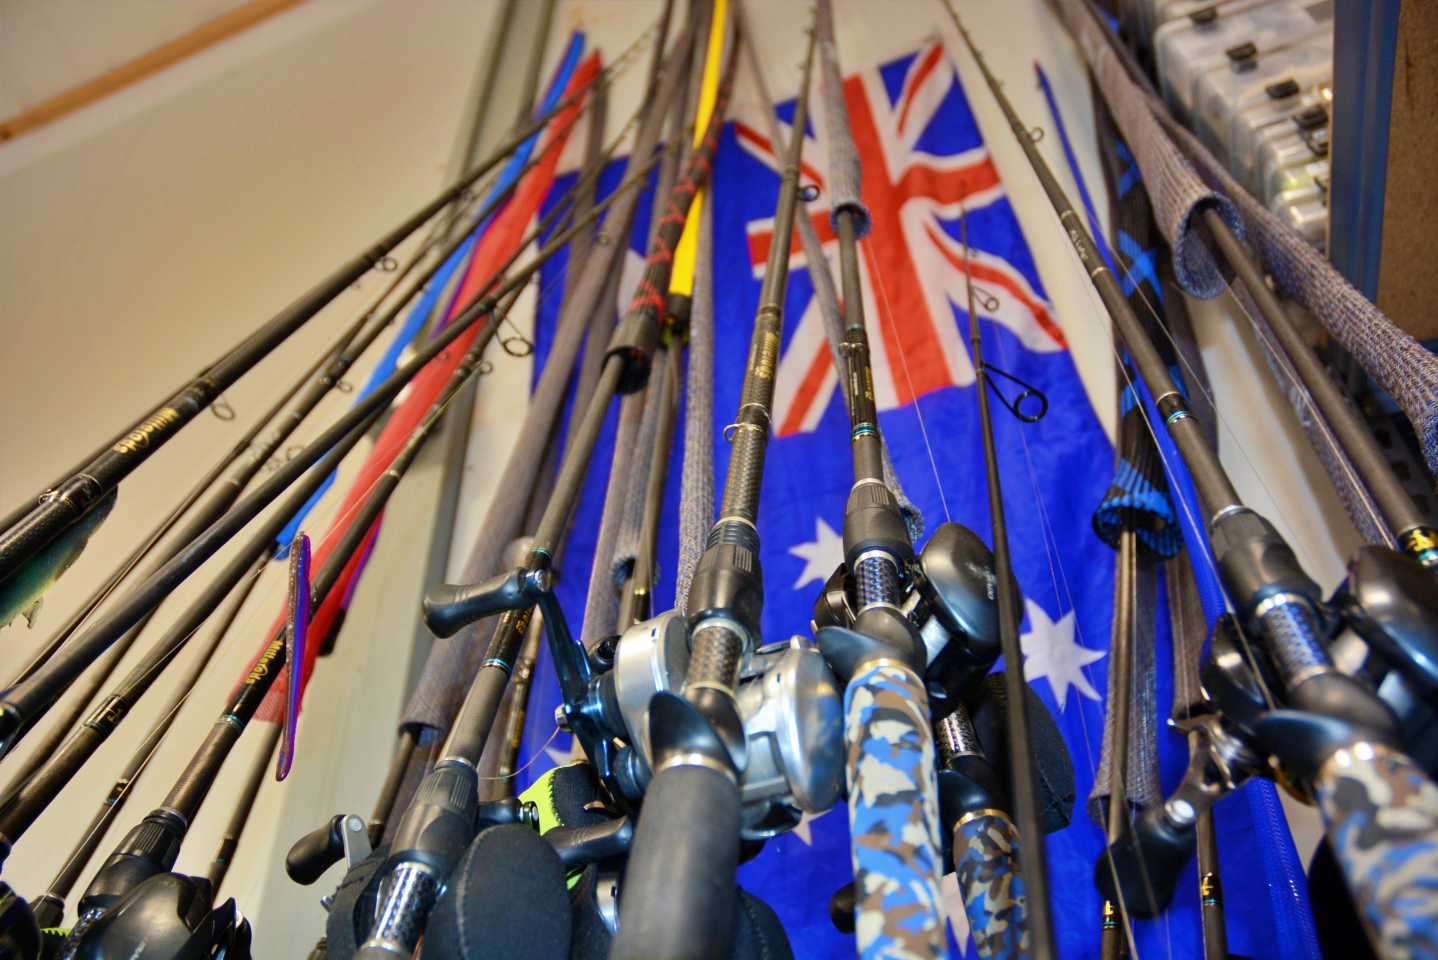 Millerods and Shimano reels are ready for loading into the Bass Cat. Millerods is a longtime sponsor and leading rod maker in Australia, where Carl collaborated with designer Ian Miller to make the perfect bass rod. Those are now available in the U.S.